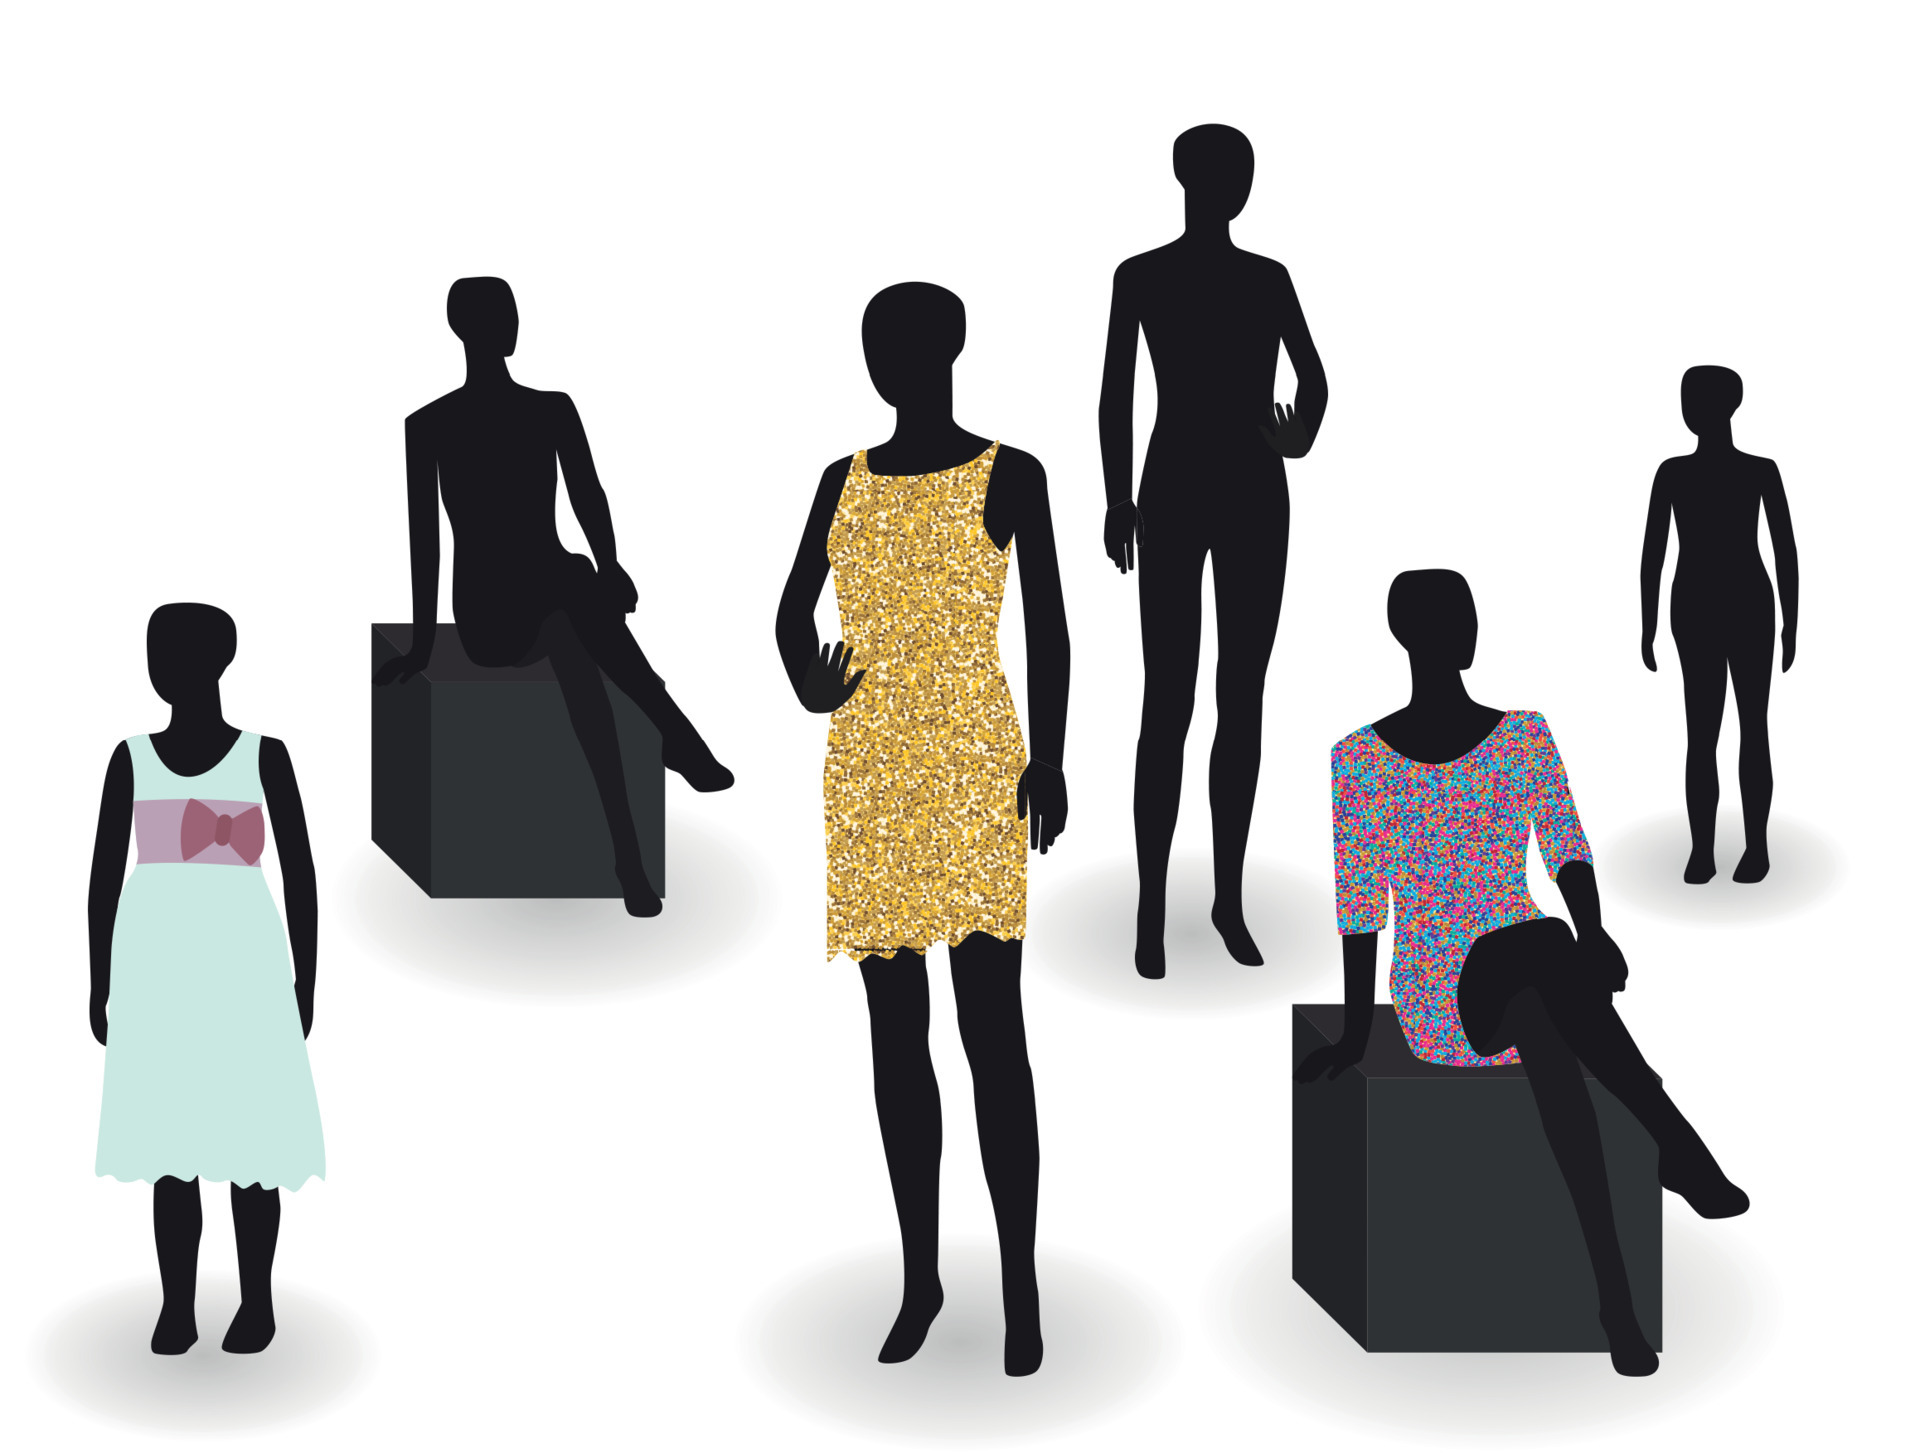 Clothes mannequin Vectors & Illustrations for Free Download